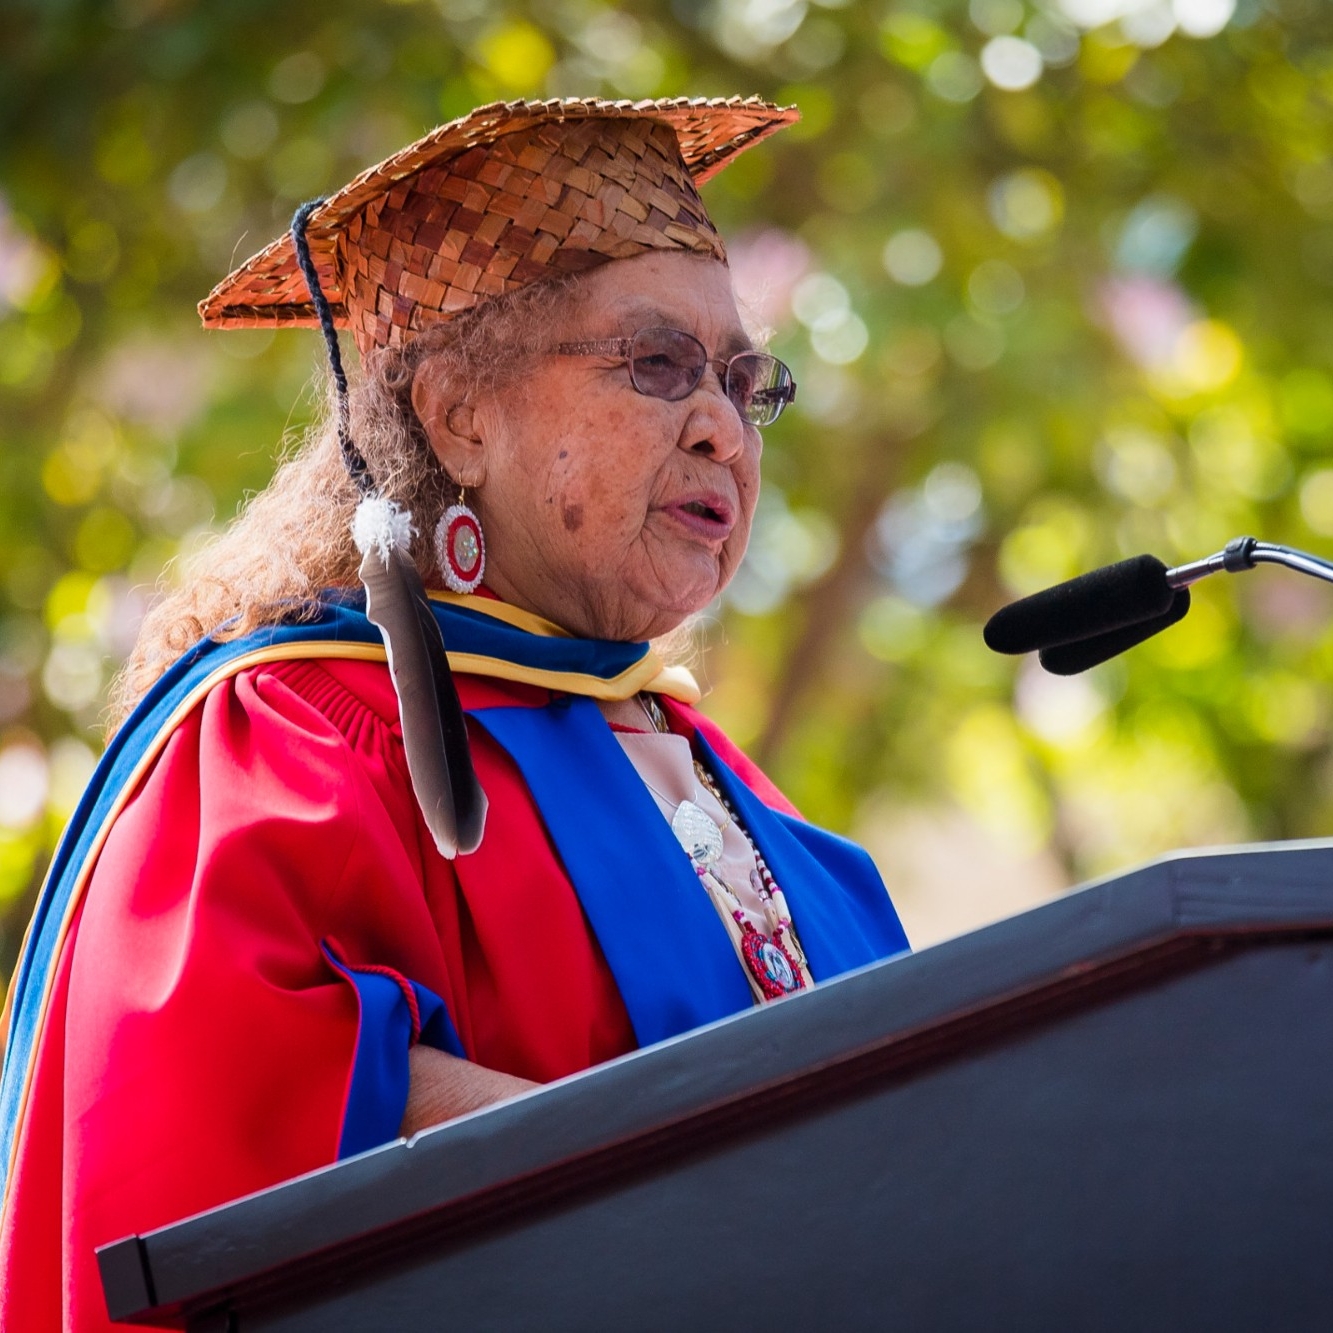 Ruby Peters is photographed giving a speech at the 2021 Convocation ceremony. She wears graduation regalia along with a cedar graduation cap.